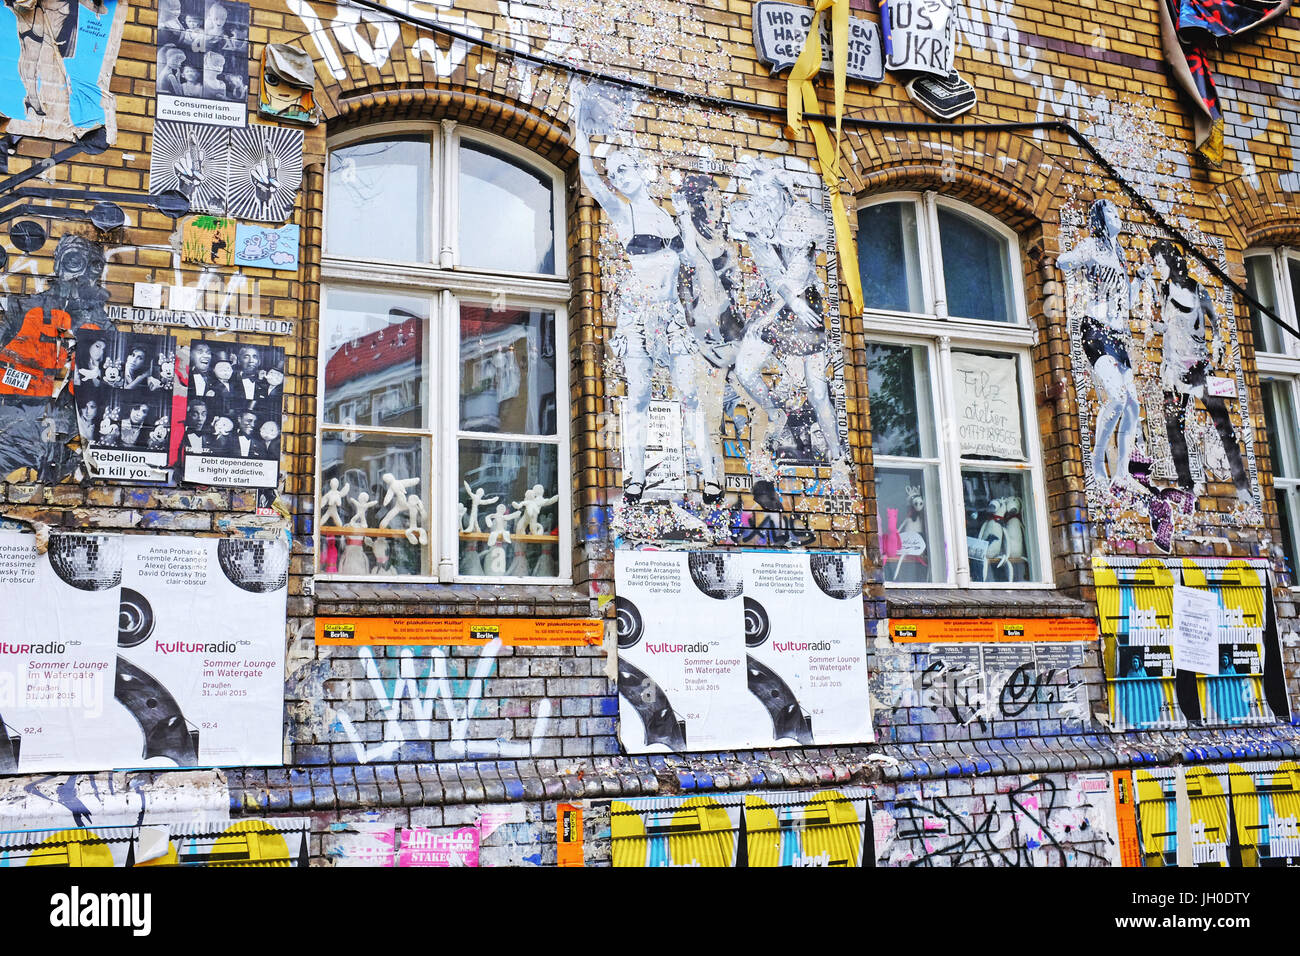 Graffiti covered exterior of old factory building in the Friedrichshain-Kreuzberg area of Berlin, Germany, a popular alternative tourism attraction. Stock Photo